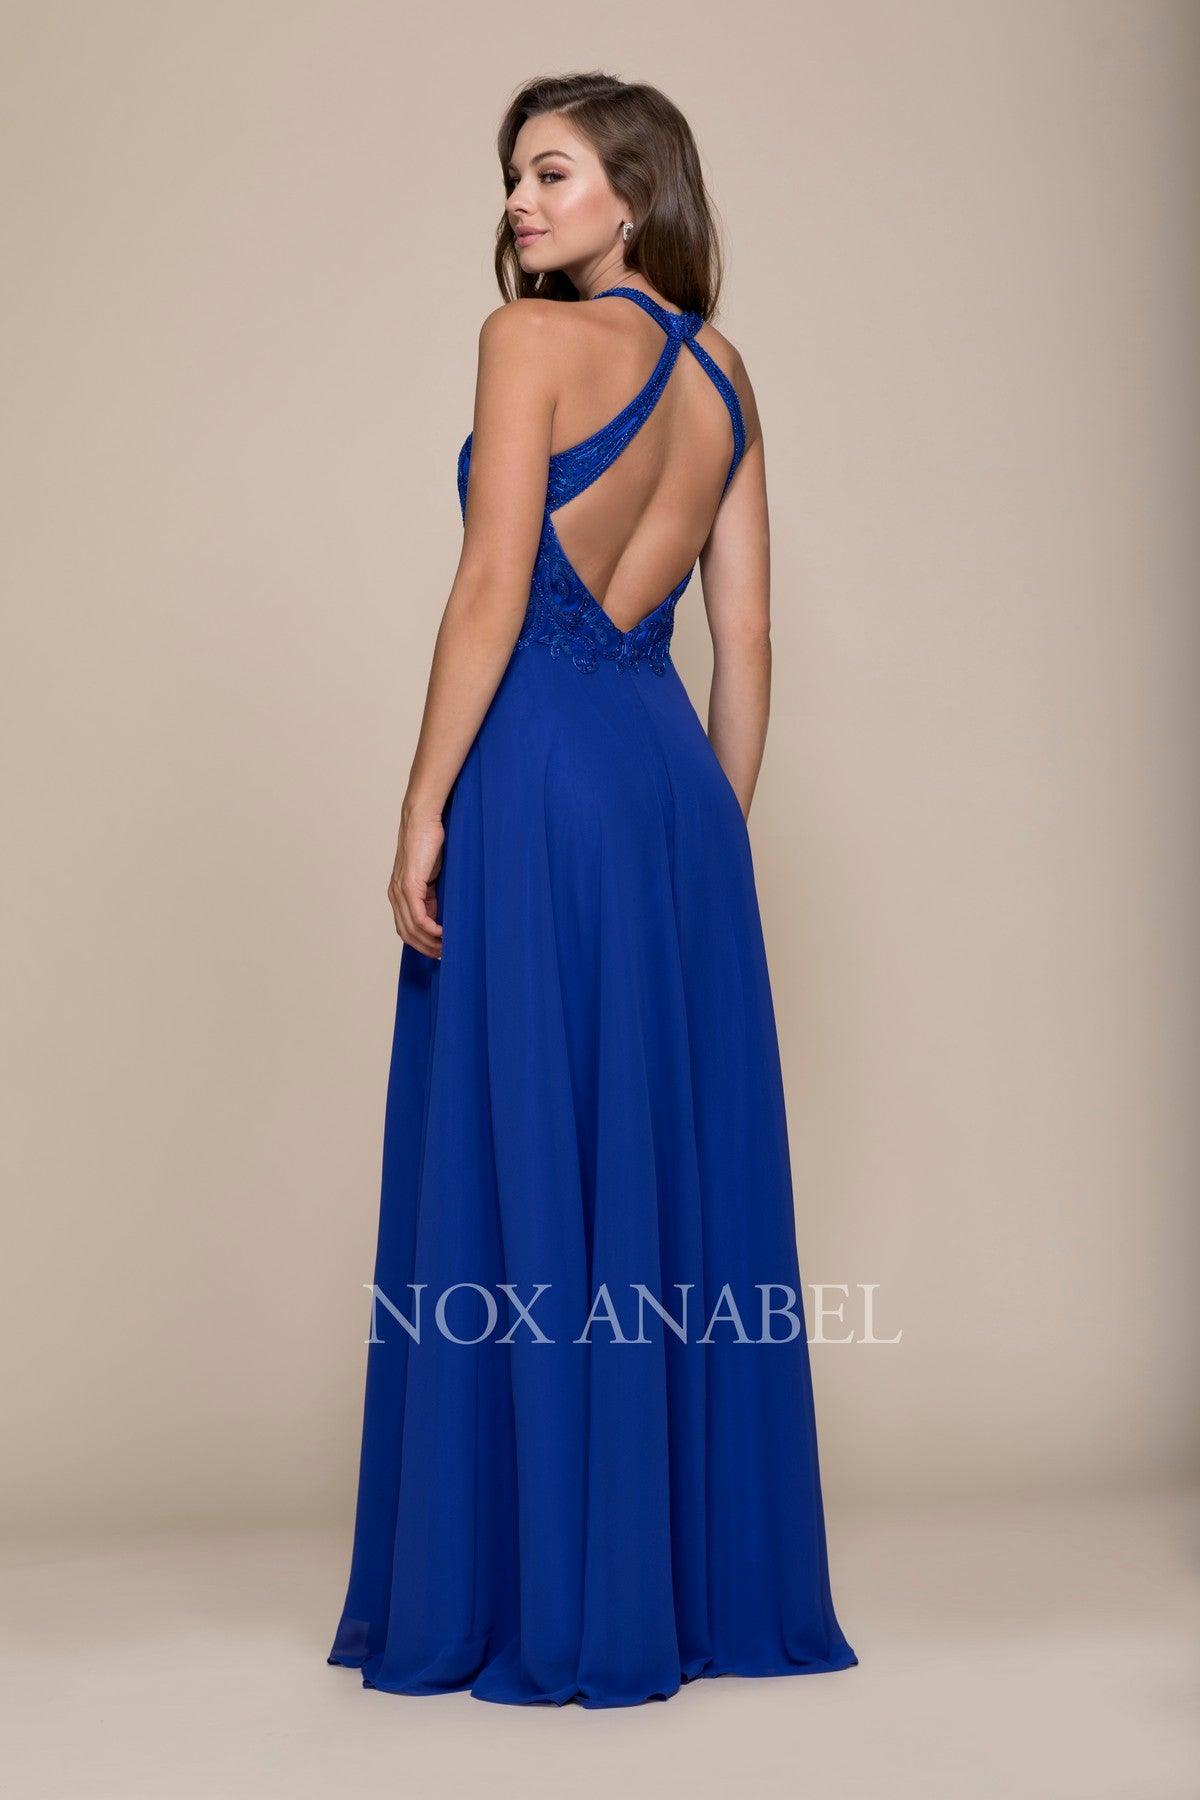 Prom Long Formal Halter Chiffon Dress - The Dress Outlet